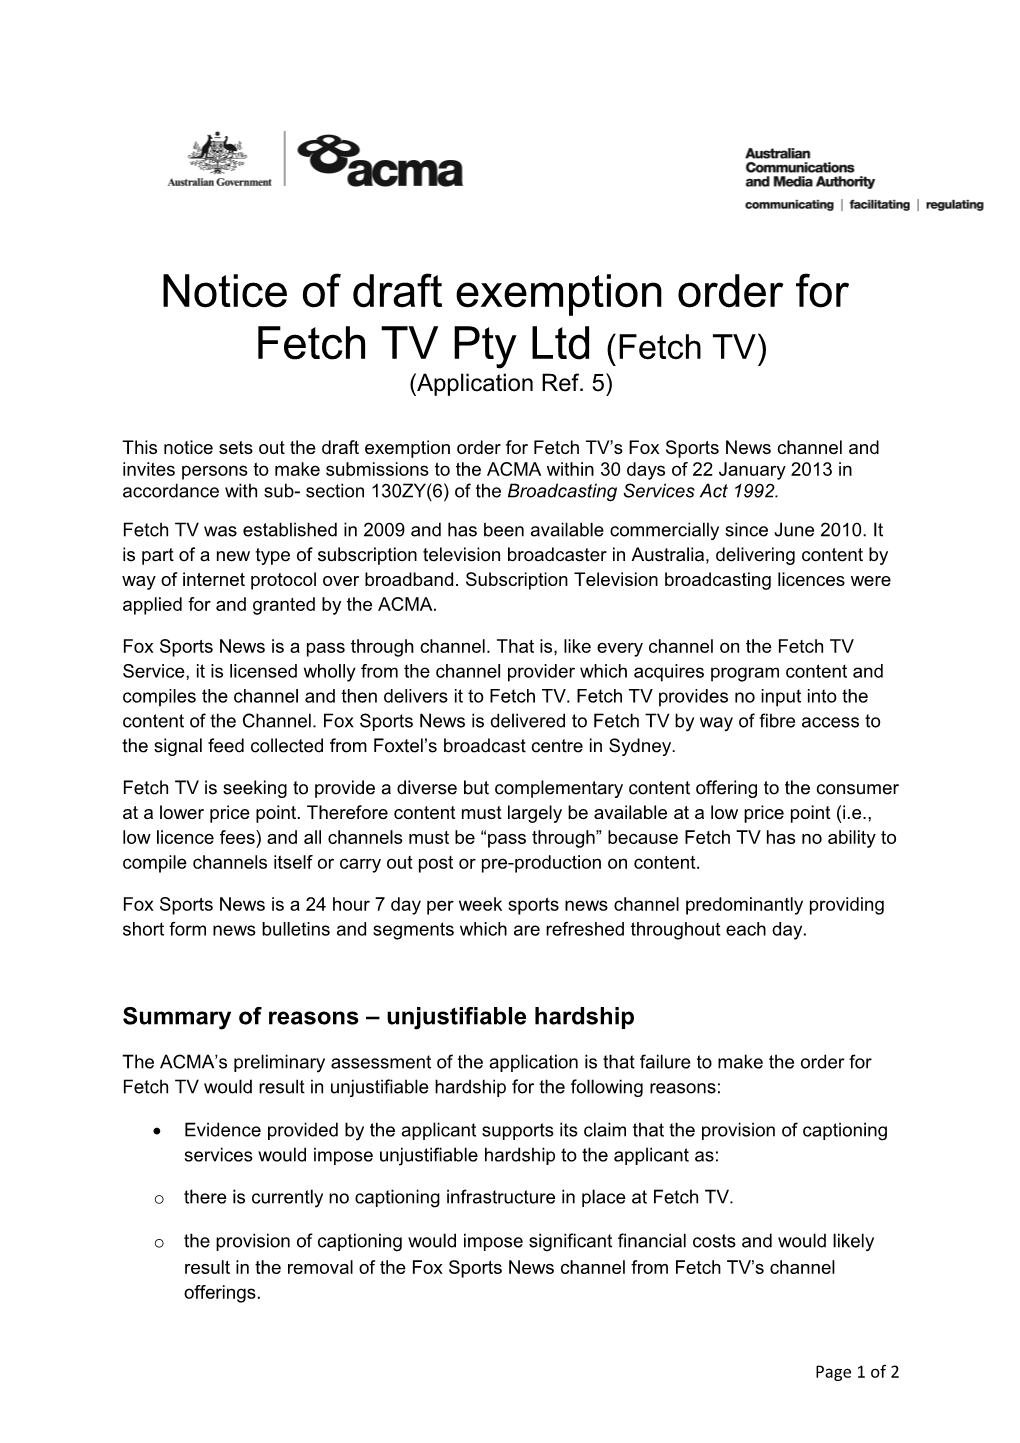 Notice of Draft Exemption Order for Fetch TV Cons 5